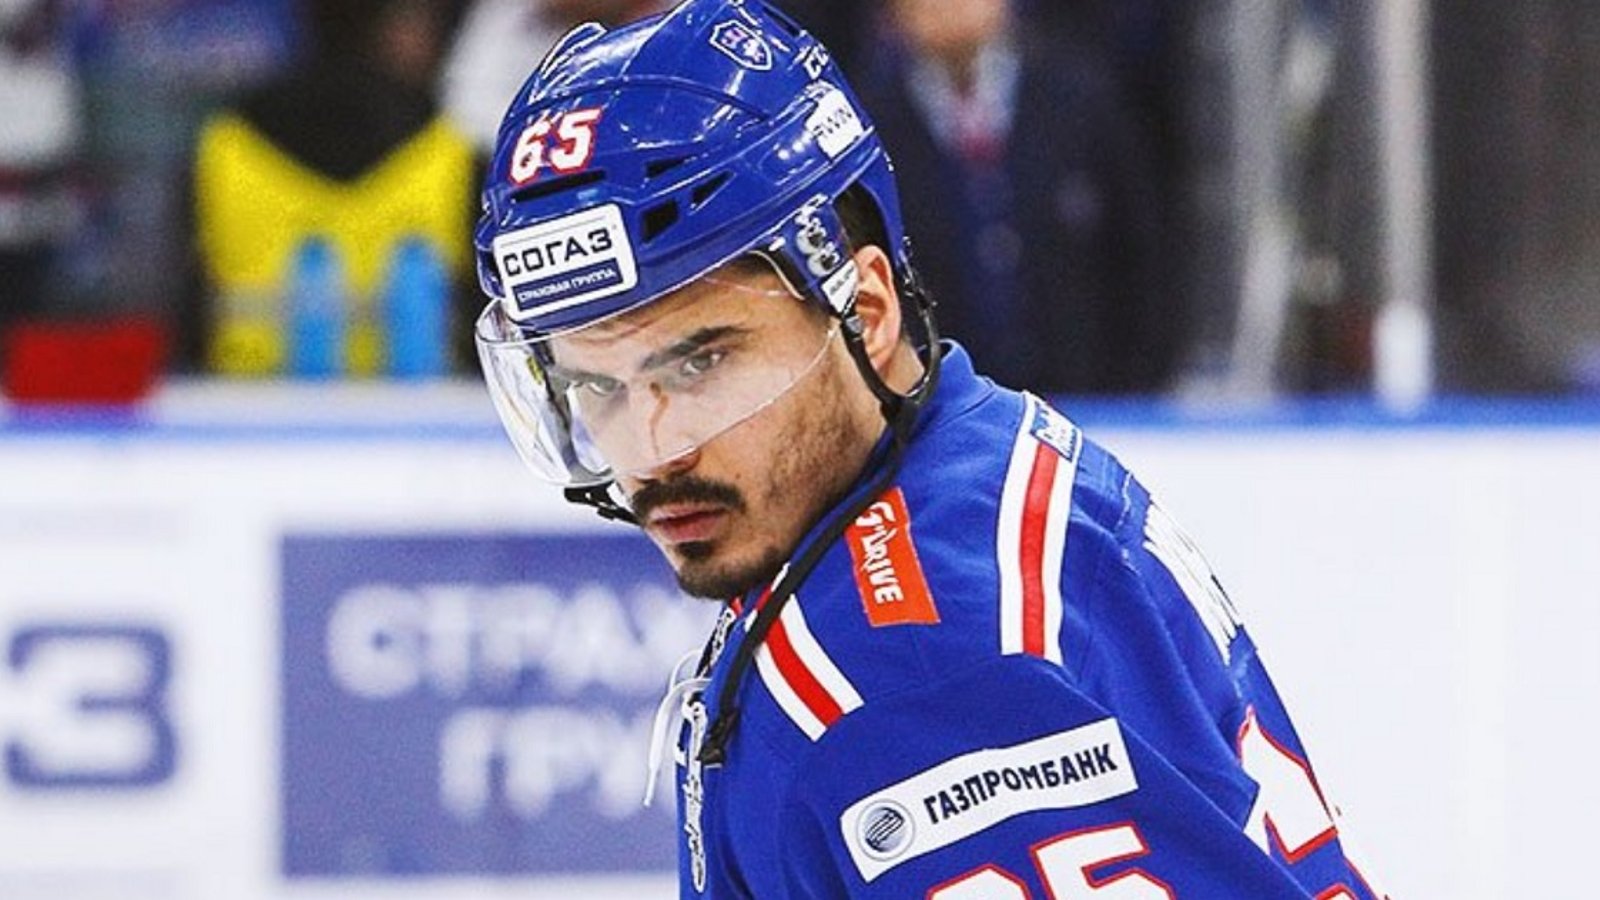 Nail Yakupov will play for hometown KHL team if there's a NHL lockout —  reports